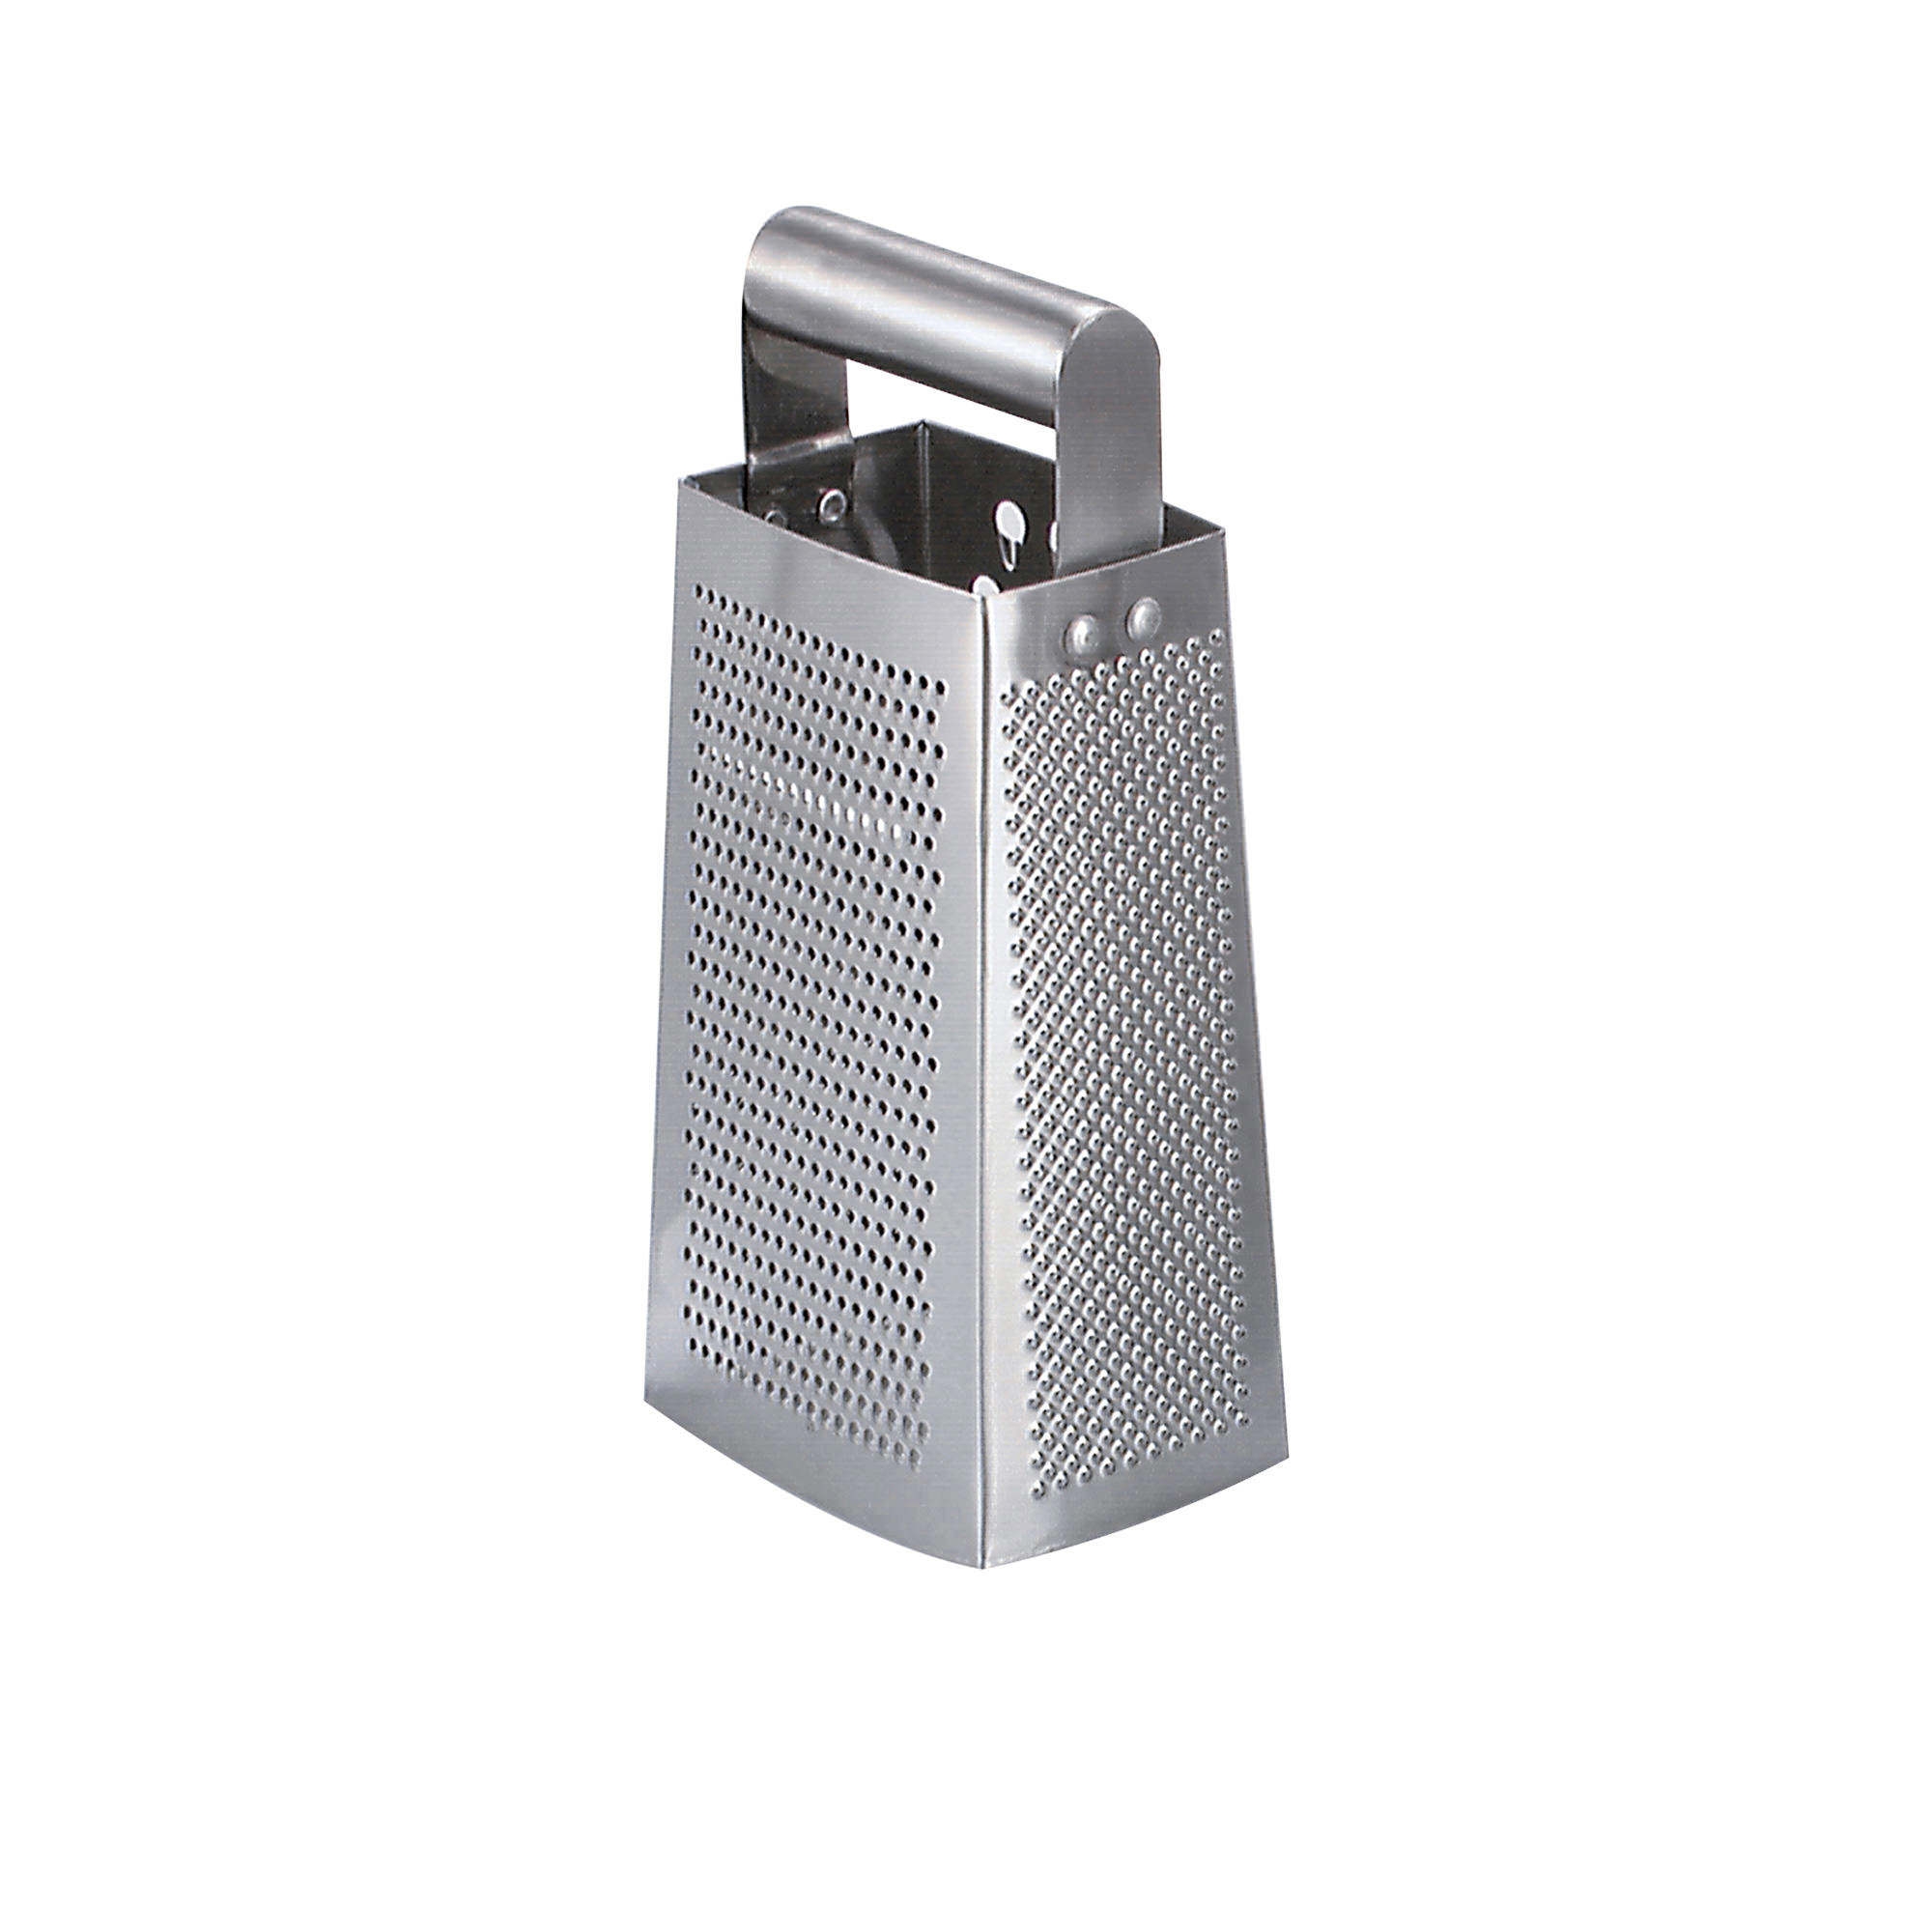 Chef Inox Box Grater with Tube Handle Image 1